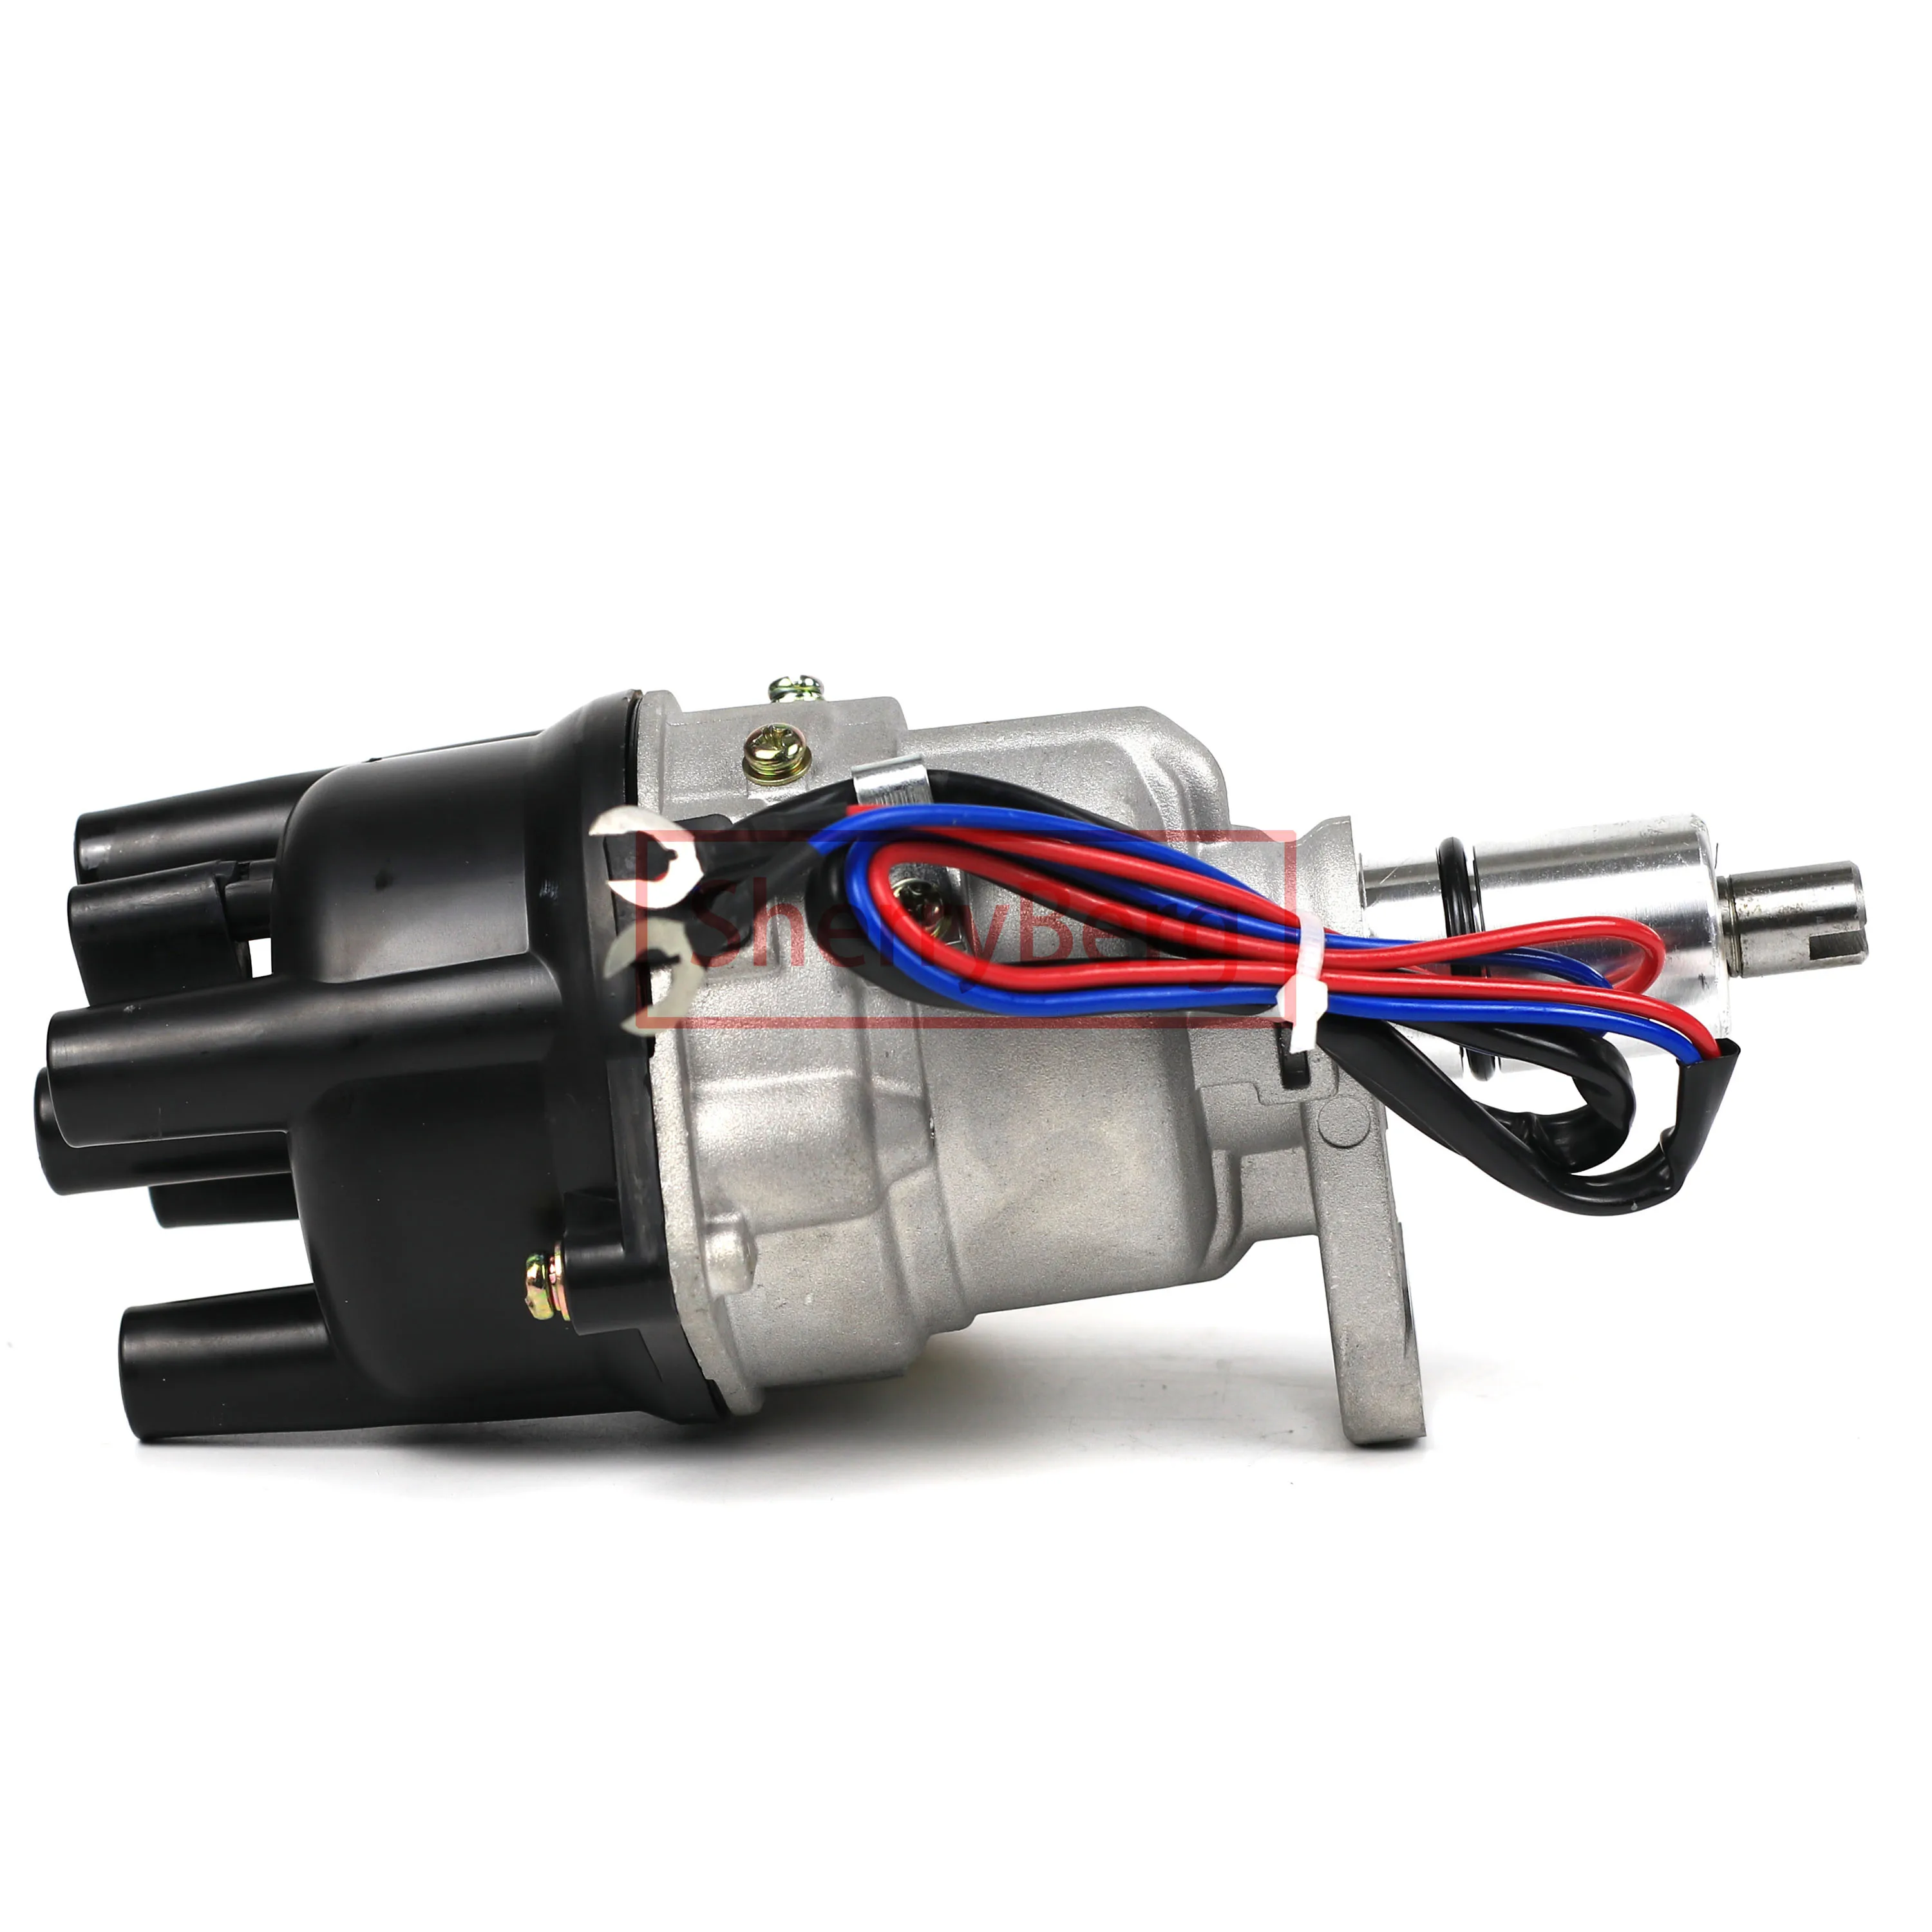 SherryBerg NEW COMPLETE ELECTRICAL ELECTRONIC IGNITION DISTRIBUTOR Fits FOR Nissan DATSUN Sentra SUNNY B11 & B12 E15  B310